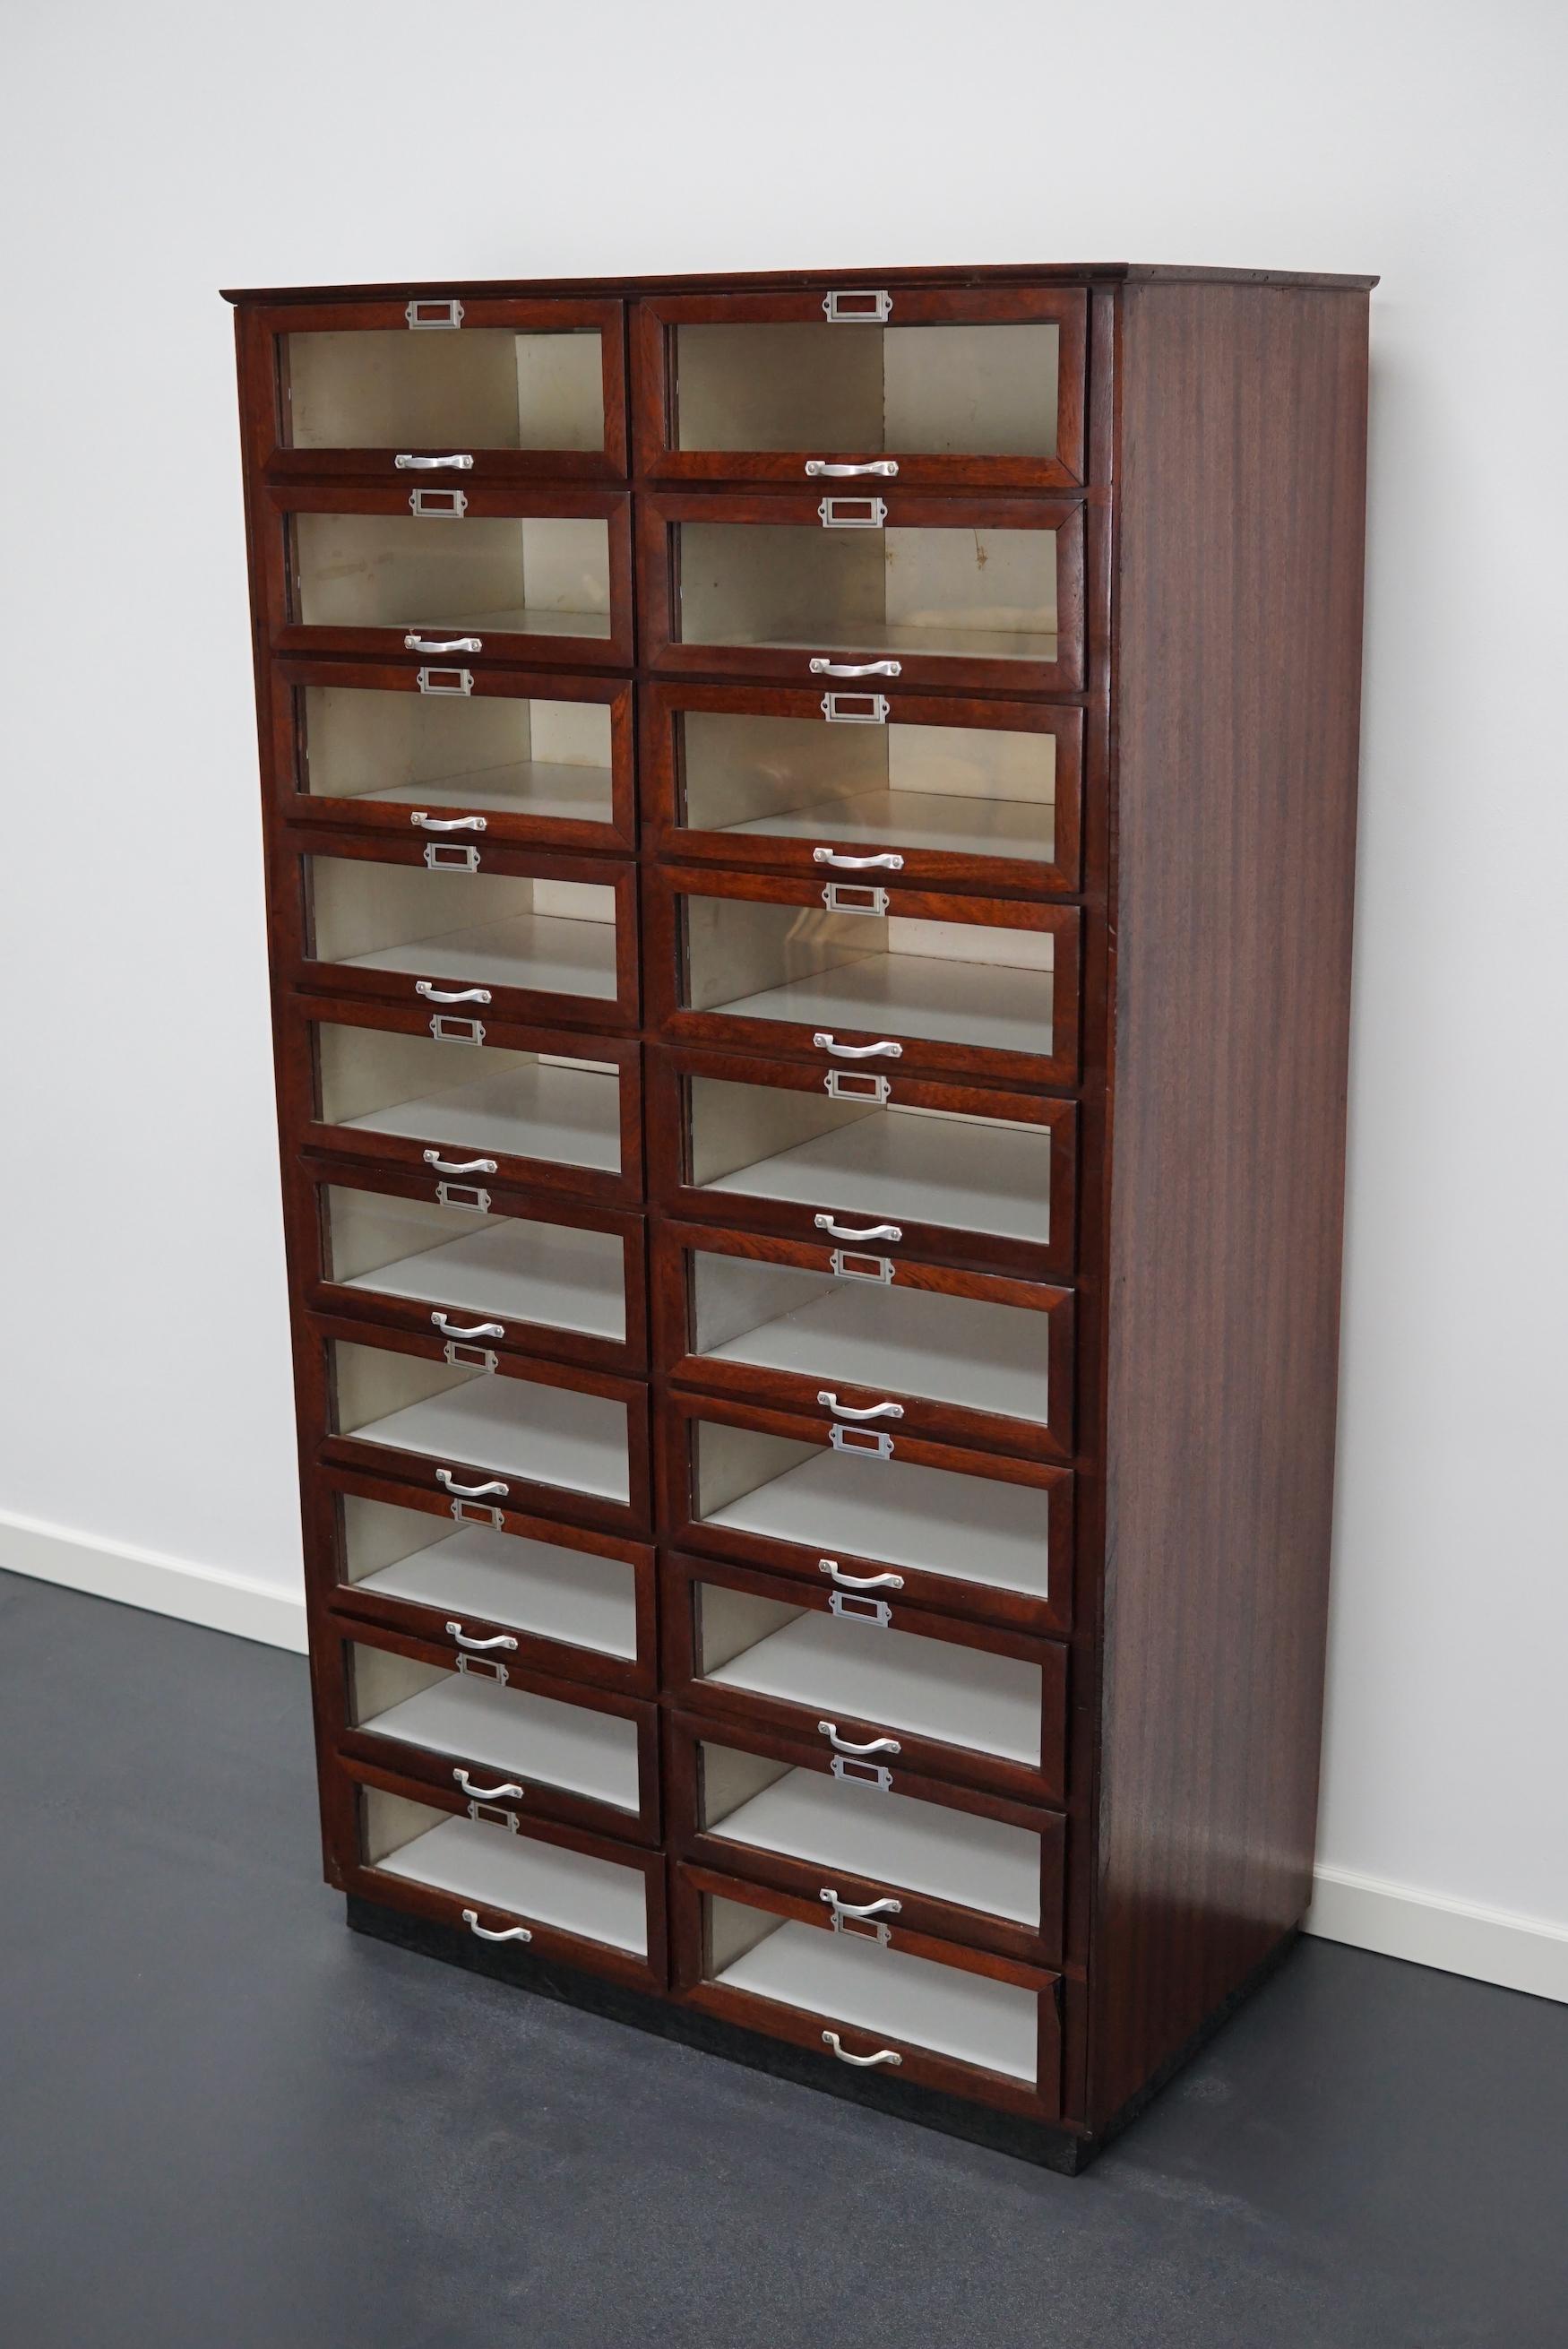 This haberdashery cabinet was produced during the 1930s in the Netherlands. This piece features 20 drawers in mahogany with glass fronts and metal handles. It was originally used in a shop for sewing supplies and fabrics in Amsterdam. The interior